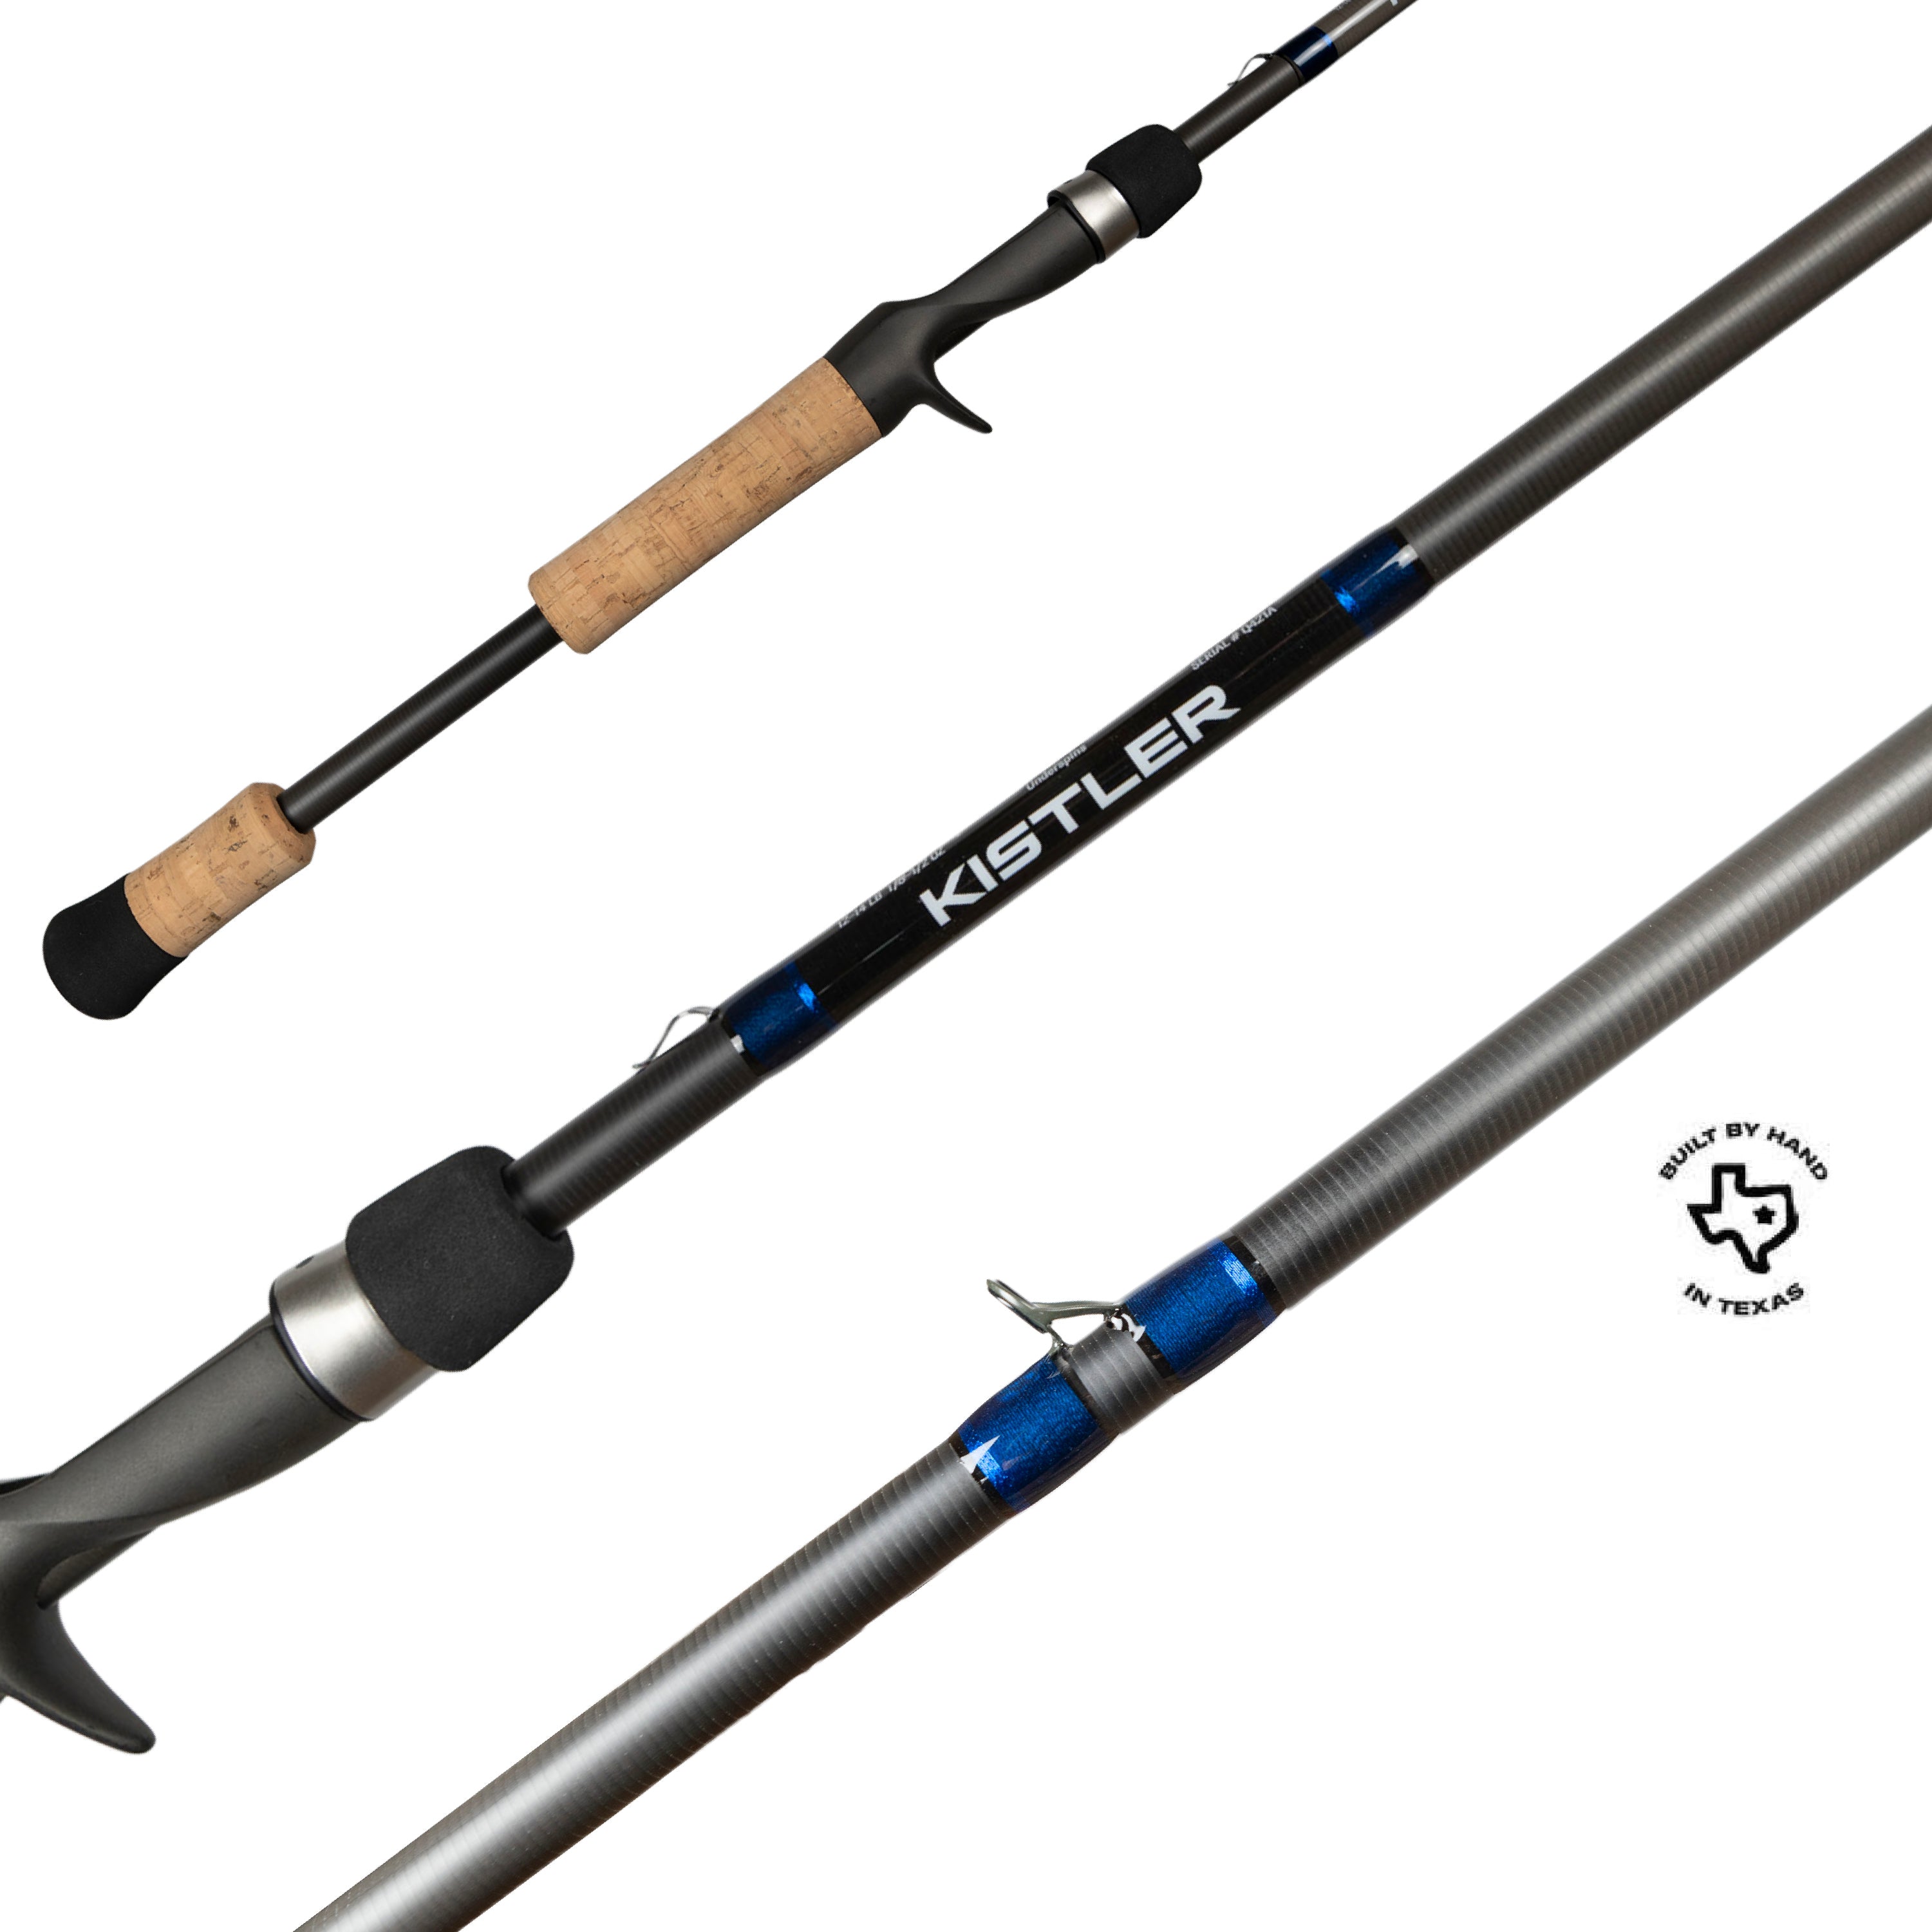 Dedicated Weightless Senko rodwhat do you use? - Fishing Rods